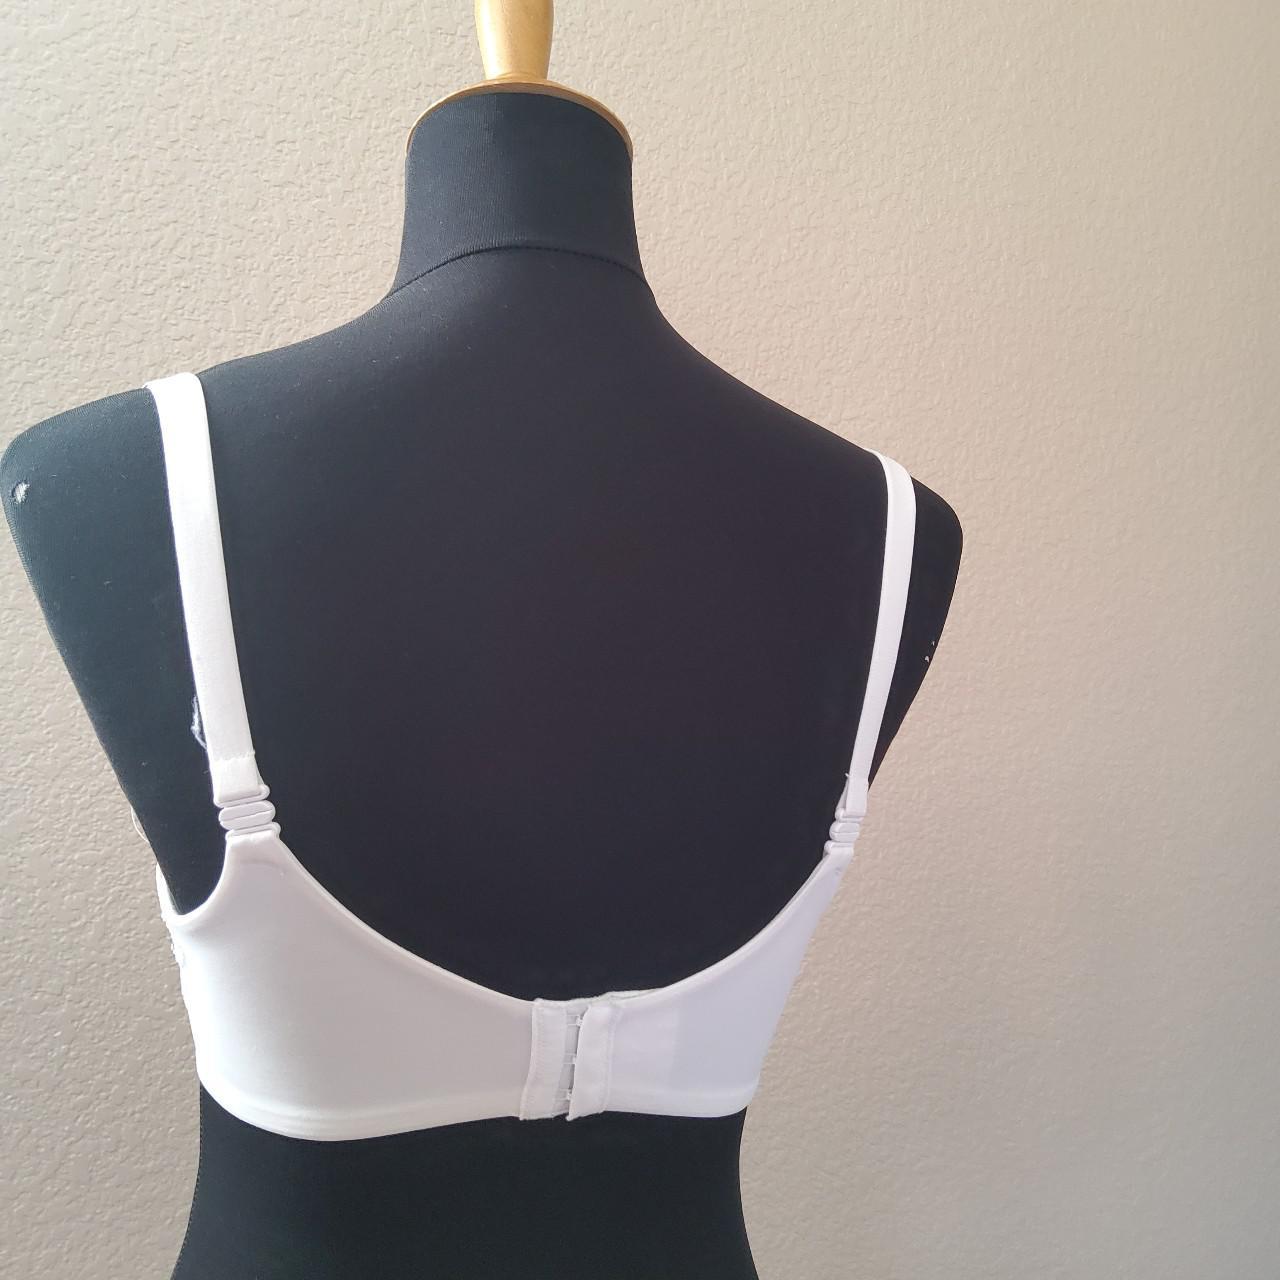 Maidenform Lace Padded Underwire Full coverage Bra - Depop